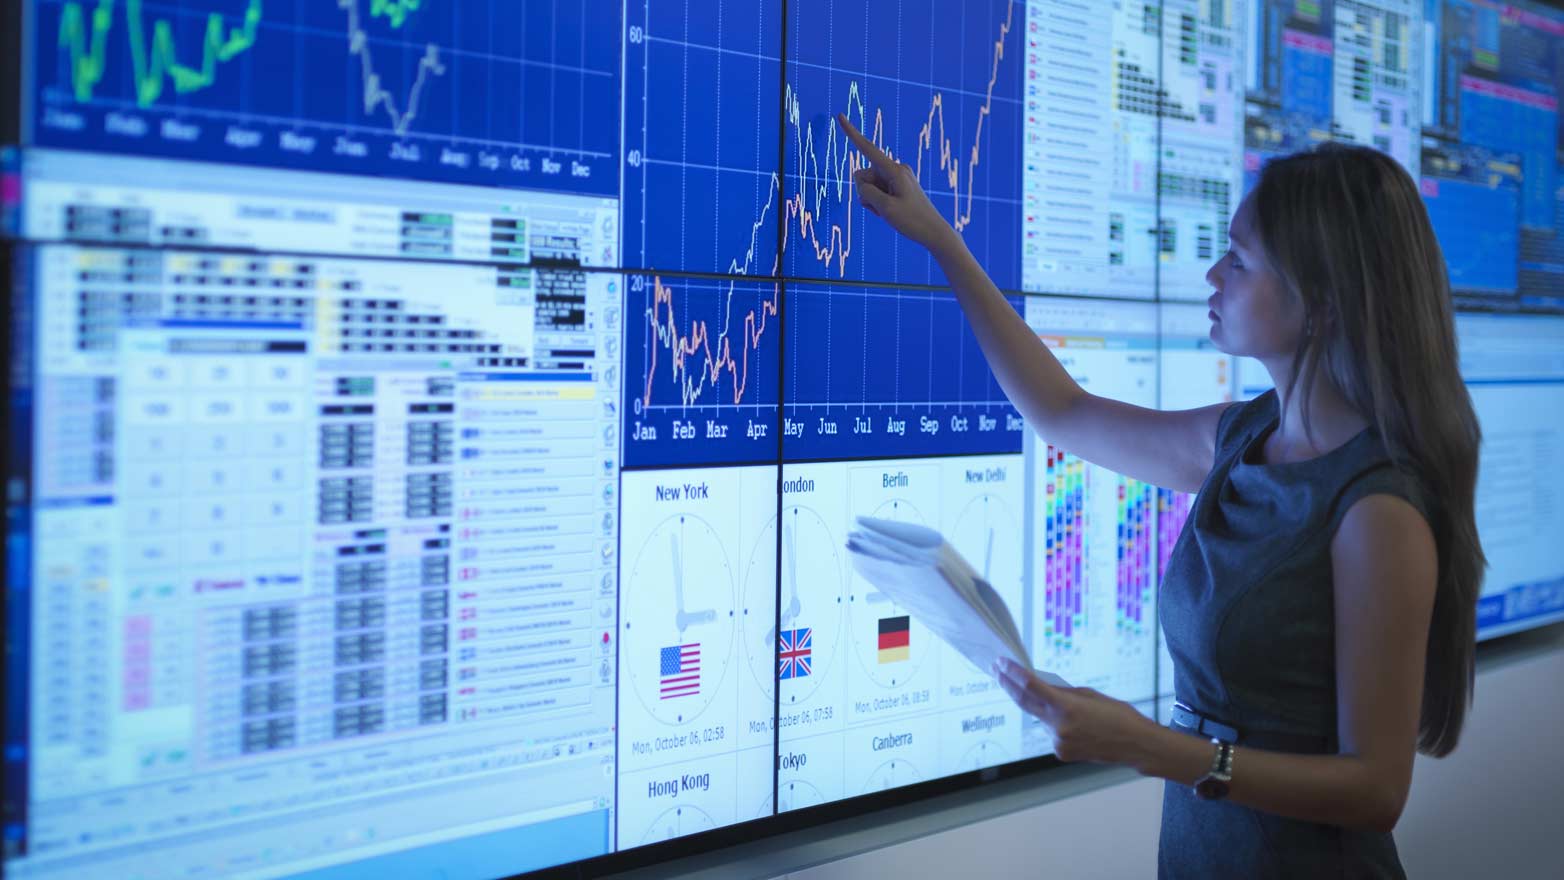 women interacting with statistical graphs on a digital display during a presentation